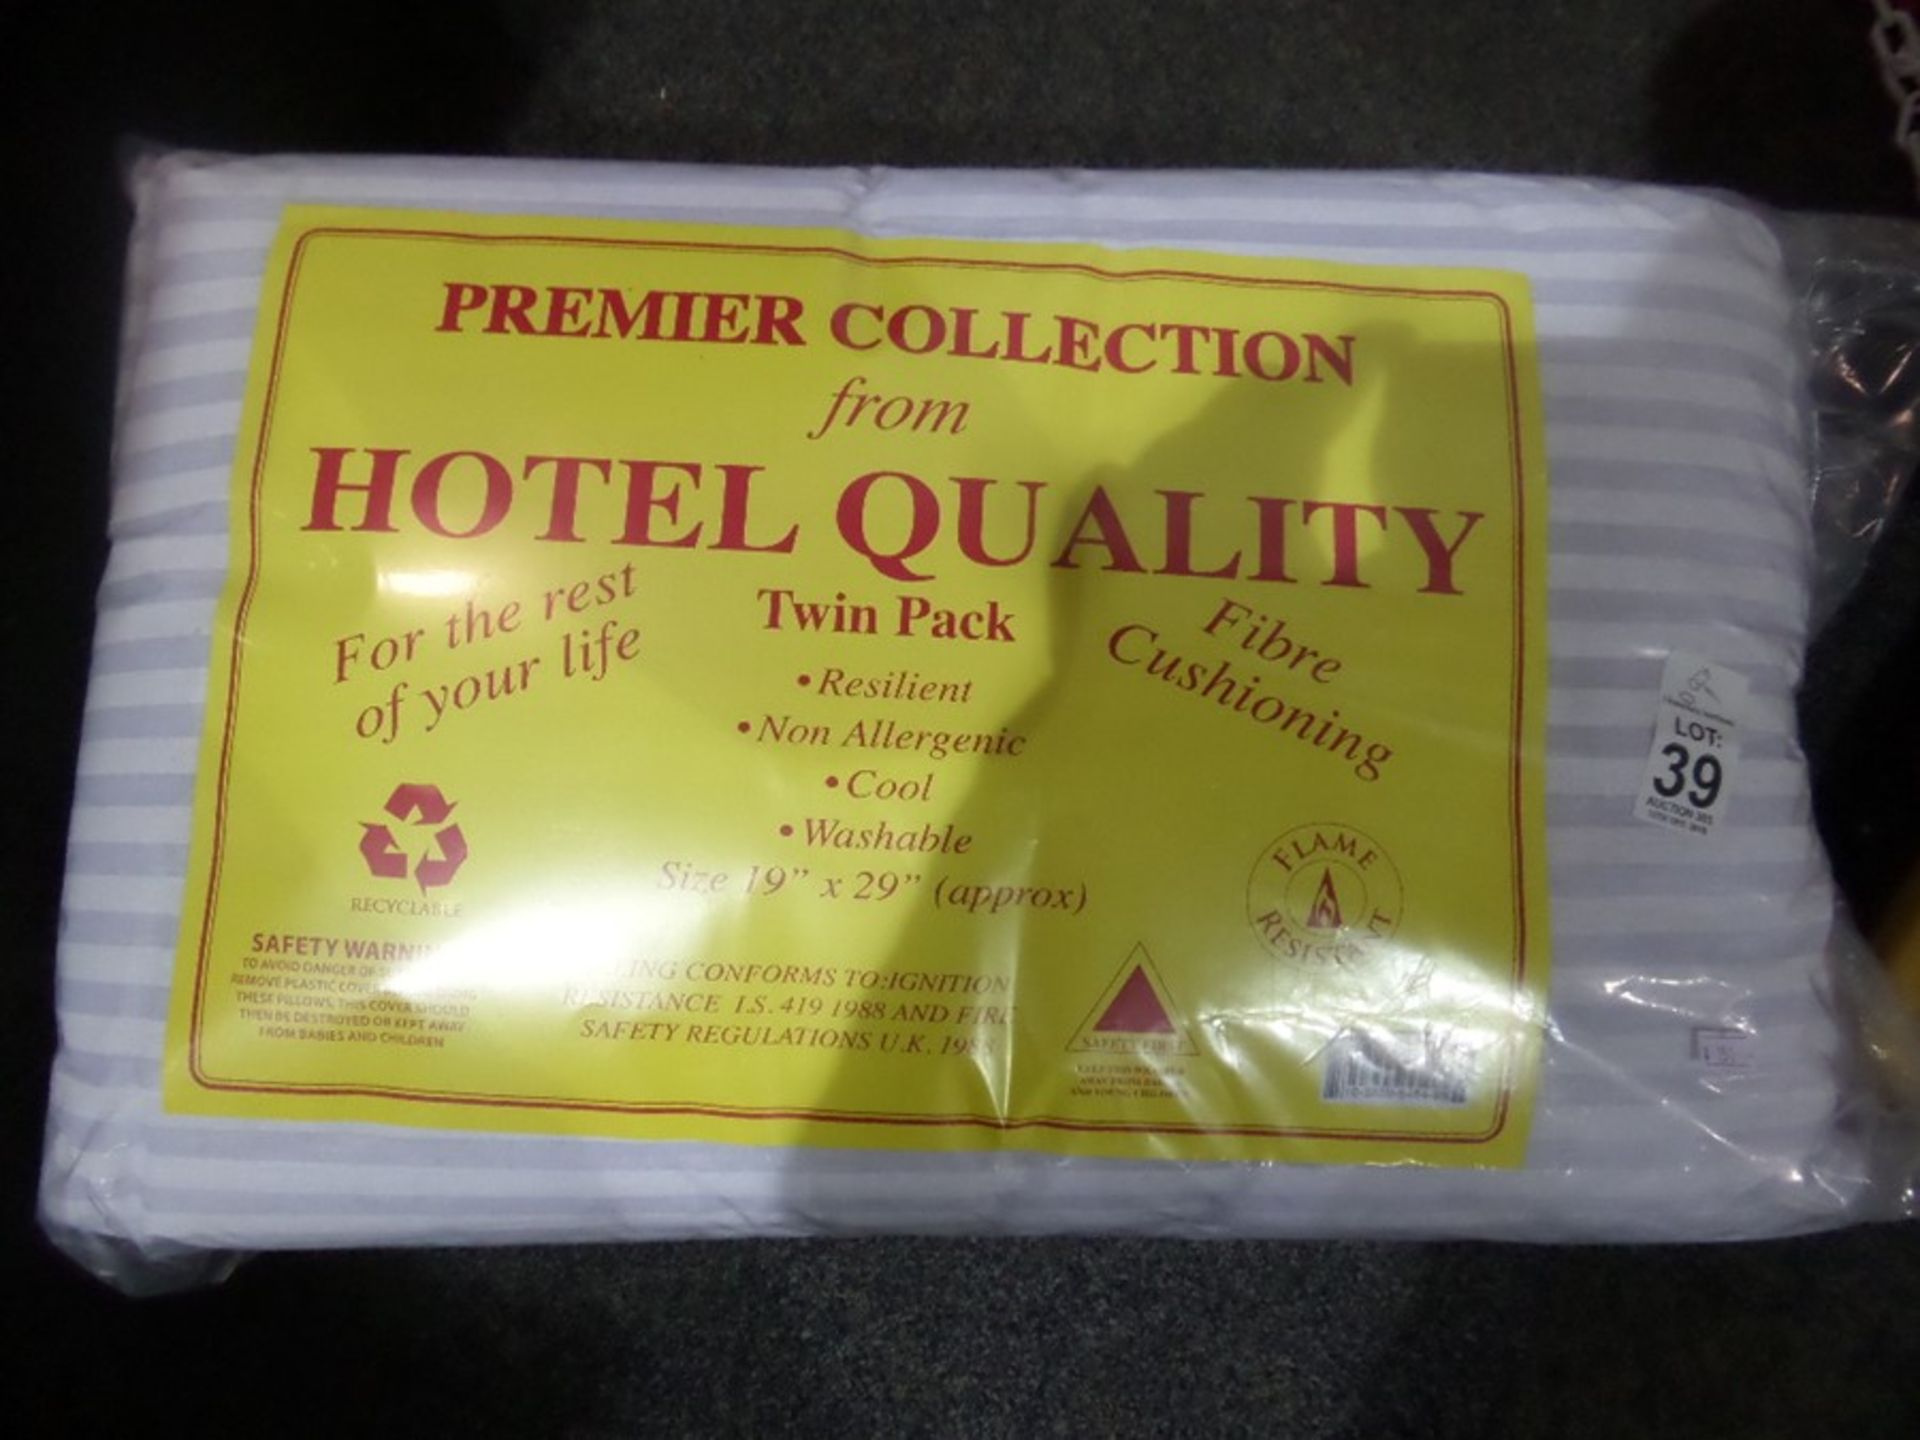 PACK OF 2 HOTEL QUALITY PILLOWS